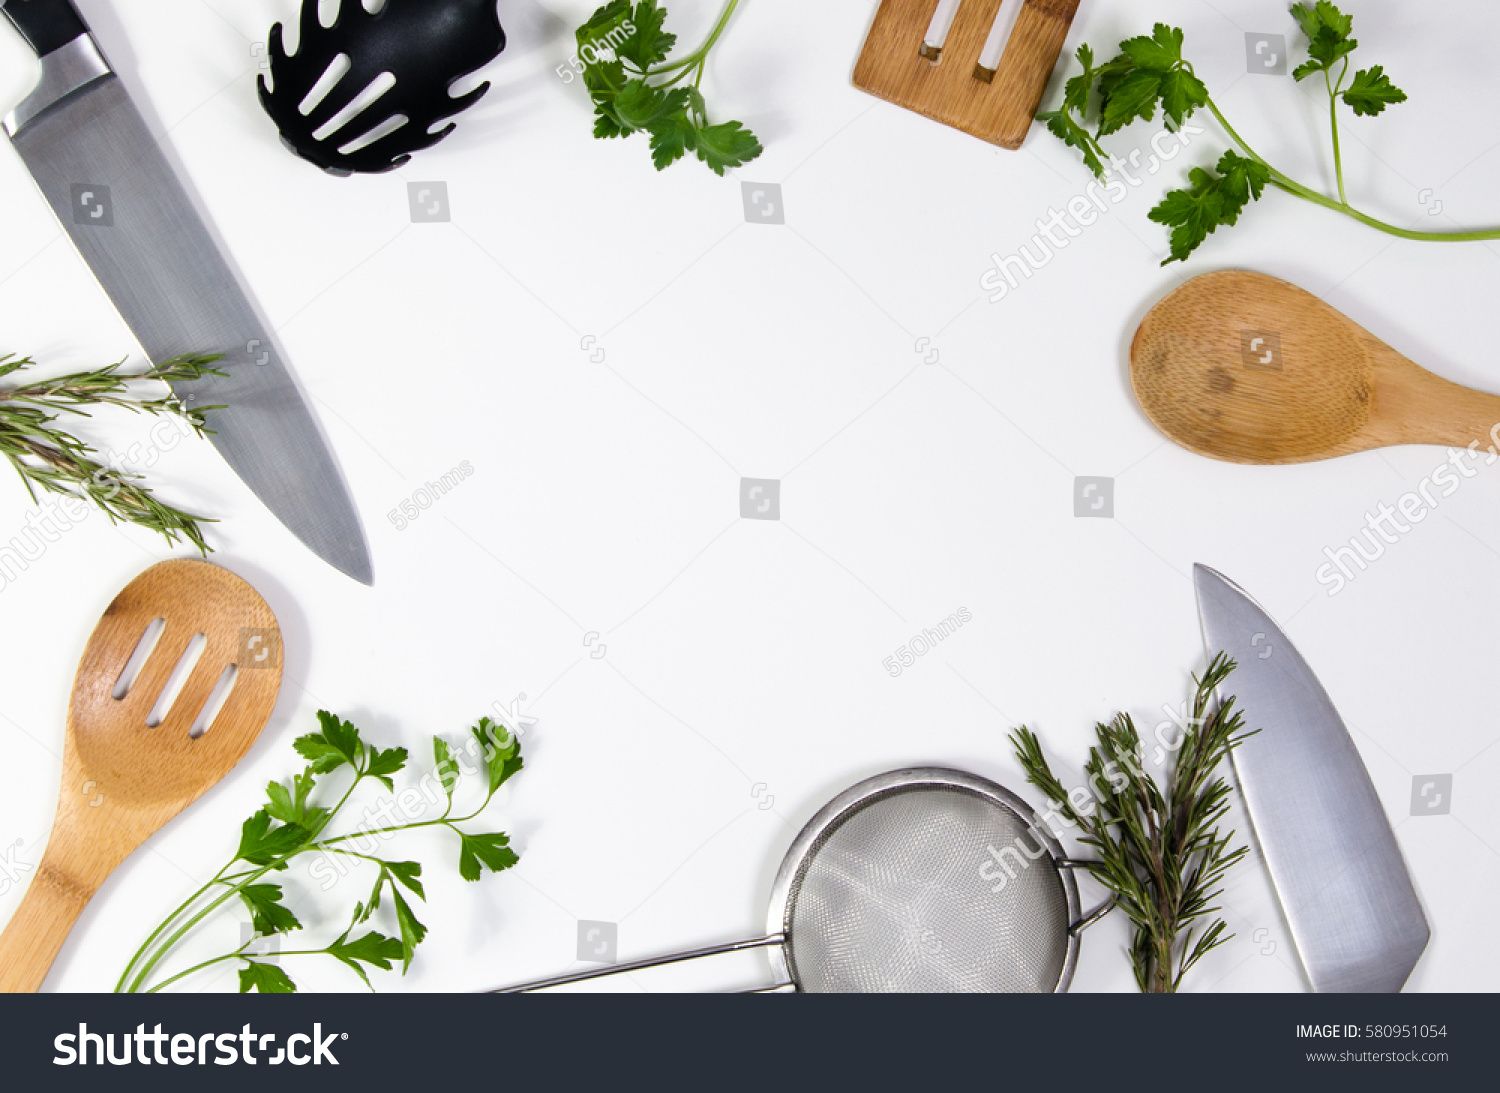 Concept idea for advertising or presentation in food industry, menus, brochures for restaurants. Copy space or room for text on white background, with kitchen utensils and parsley leaves scattered. #580951054